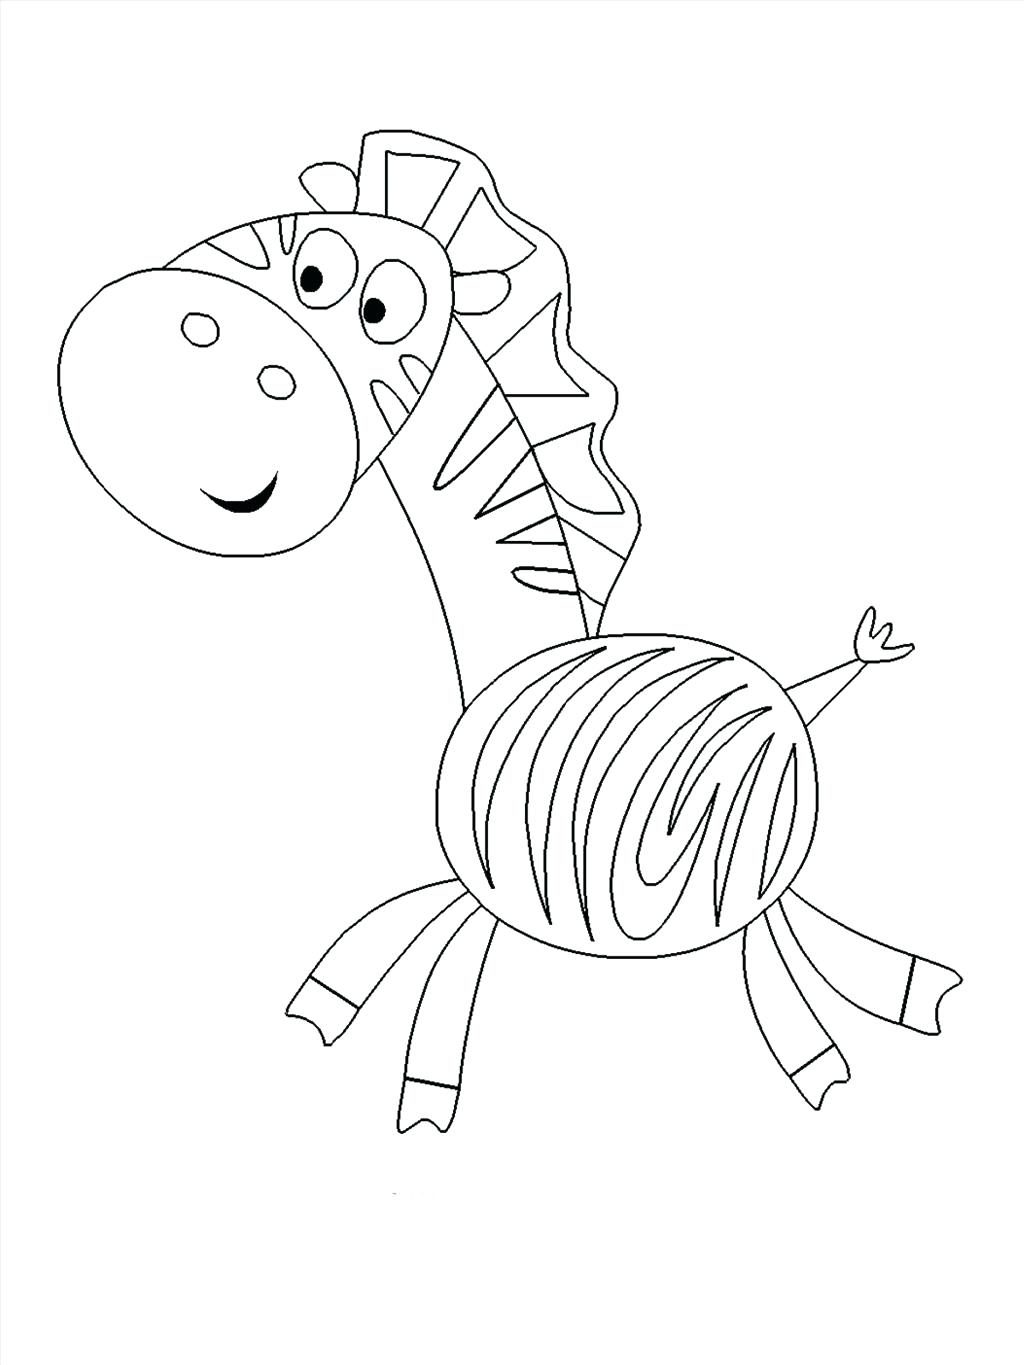 Zebra Head Coloring Pages at GetColorings.com | Free printable